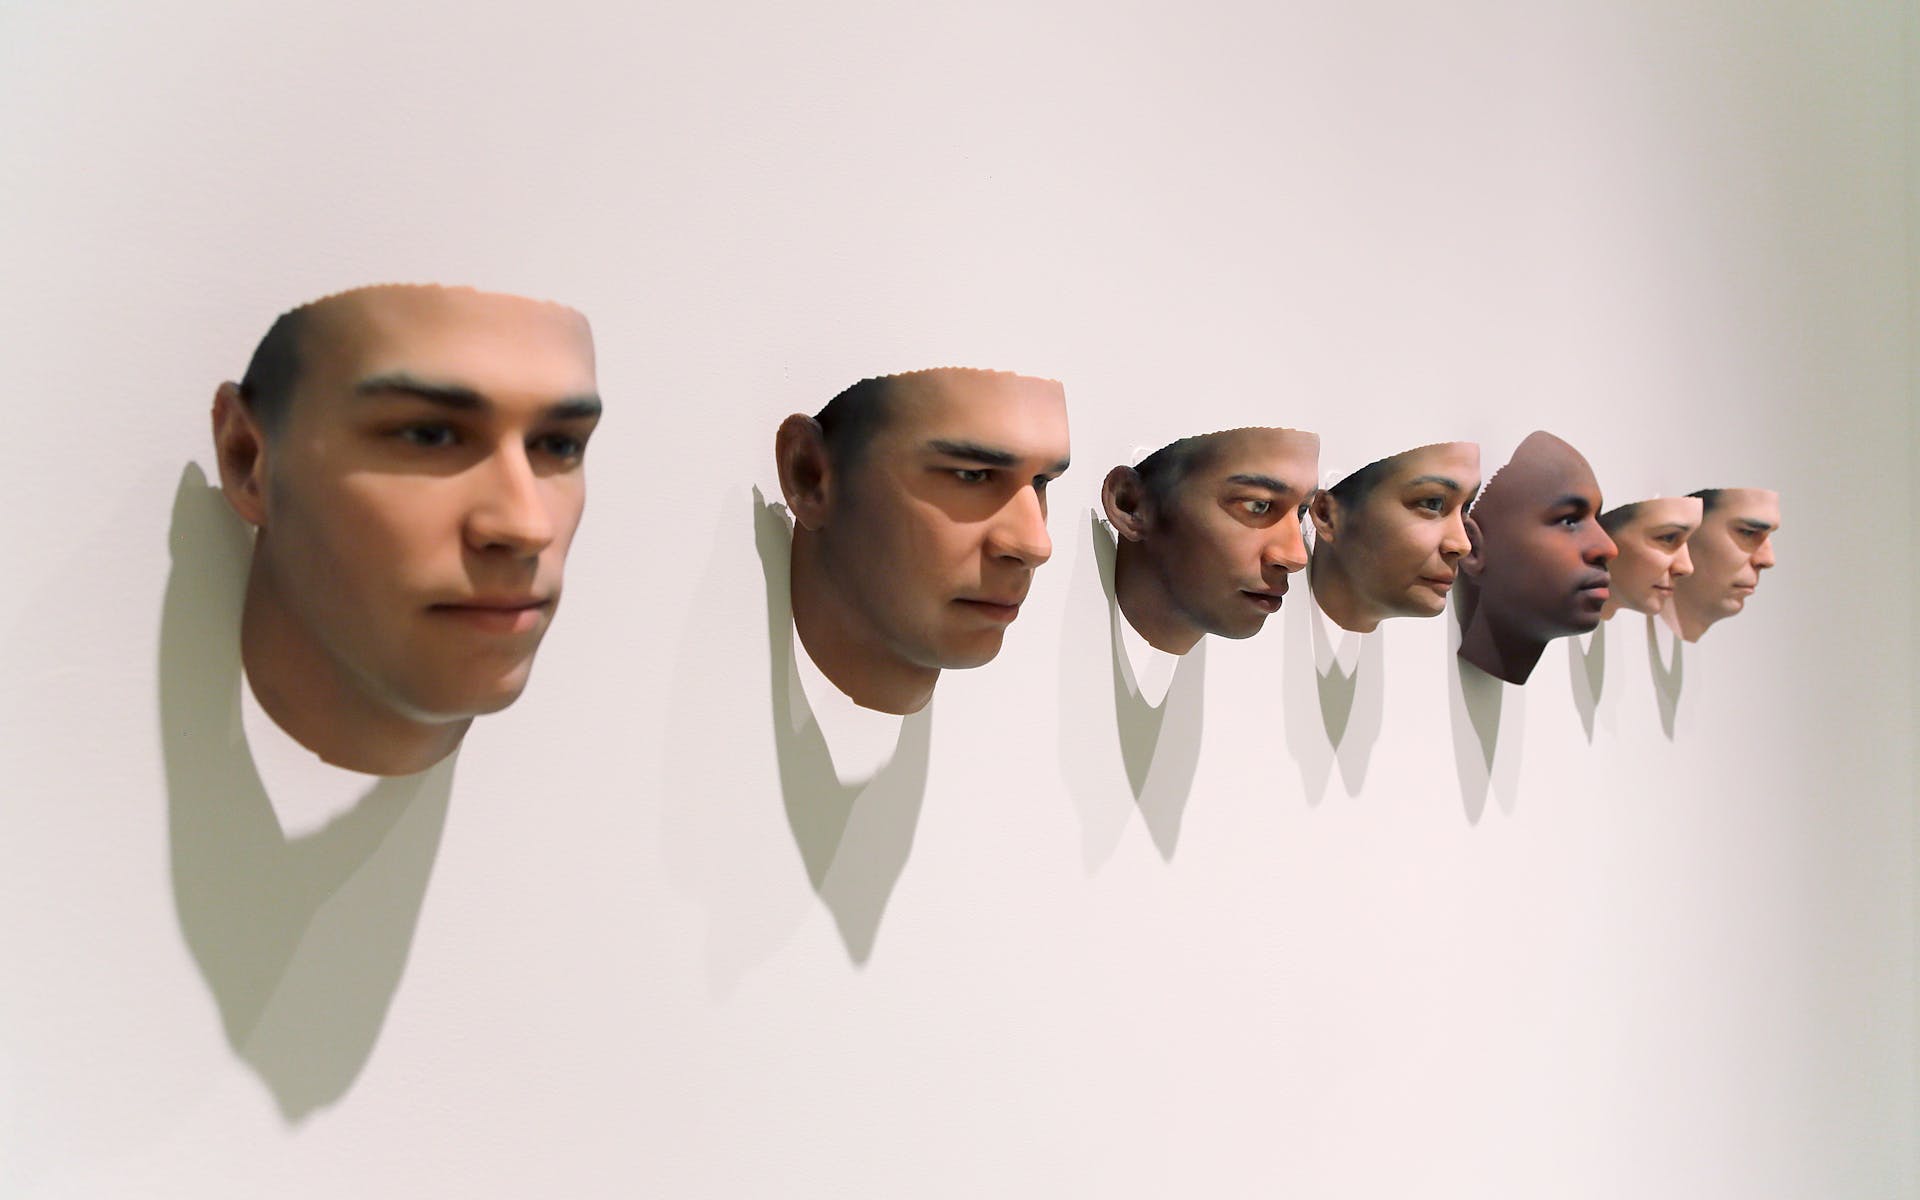 Seven 3d printed human heads mounted to a wall